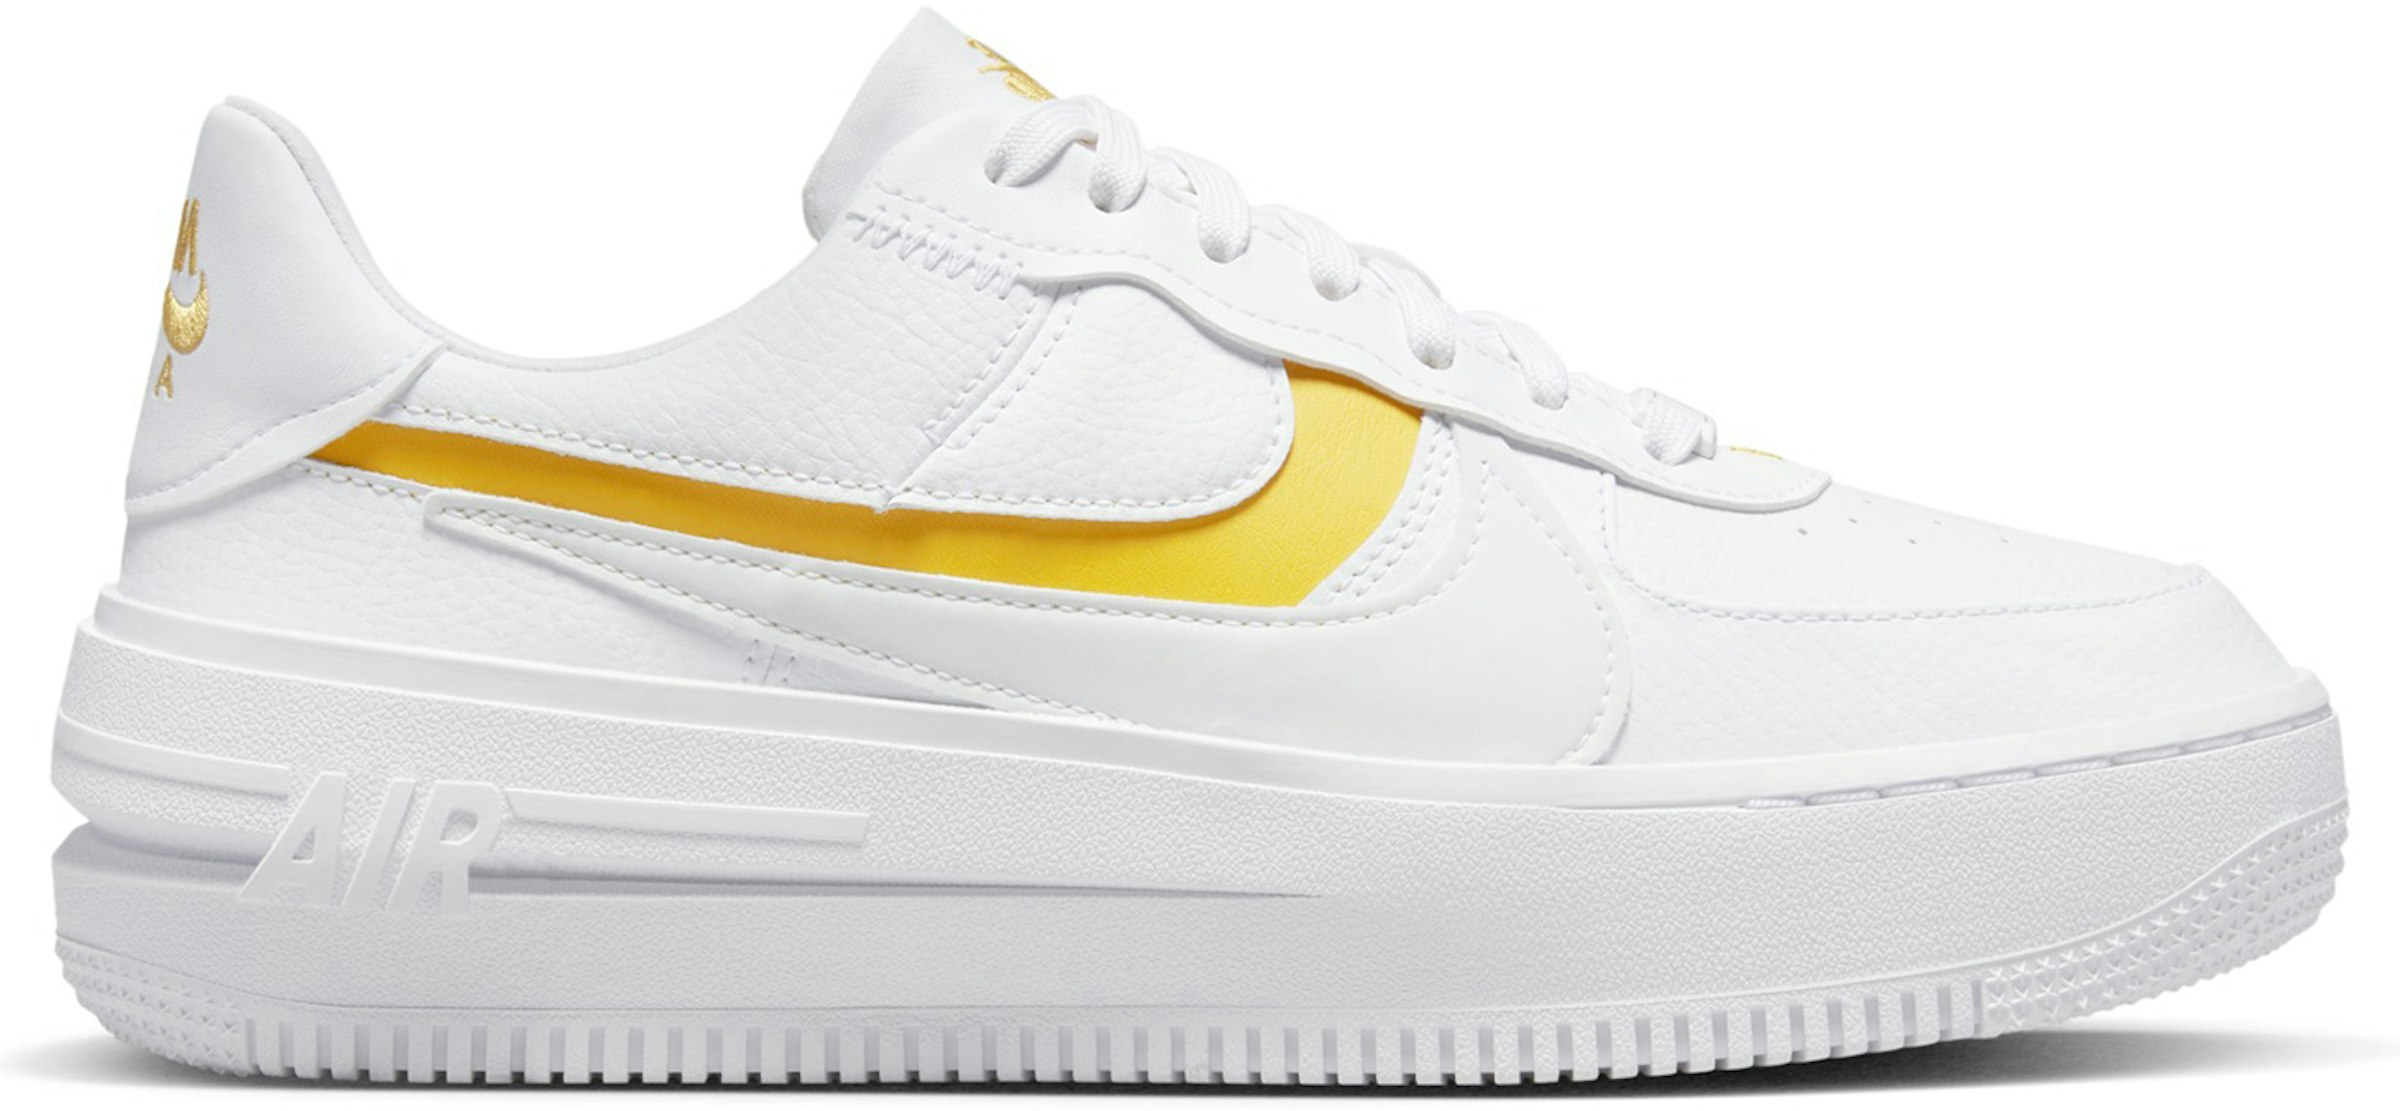 Andes Estragos Atrevimiento Nike Air Force 1 PLT.AF.ORM White Yellow Ochre (Women's) - DJ9946-102 - US